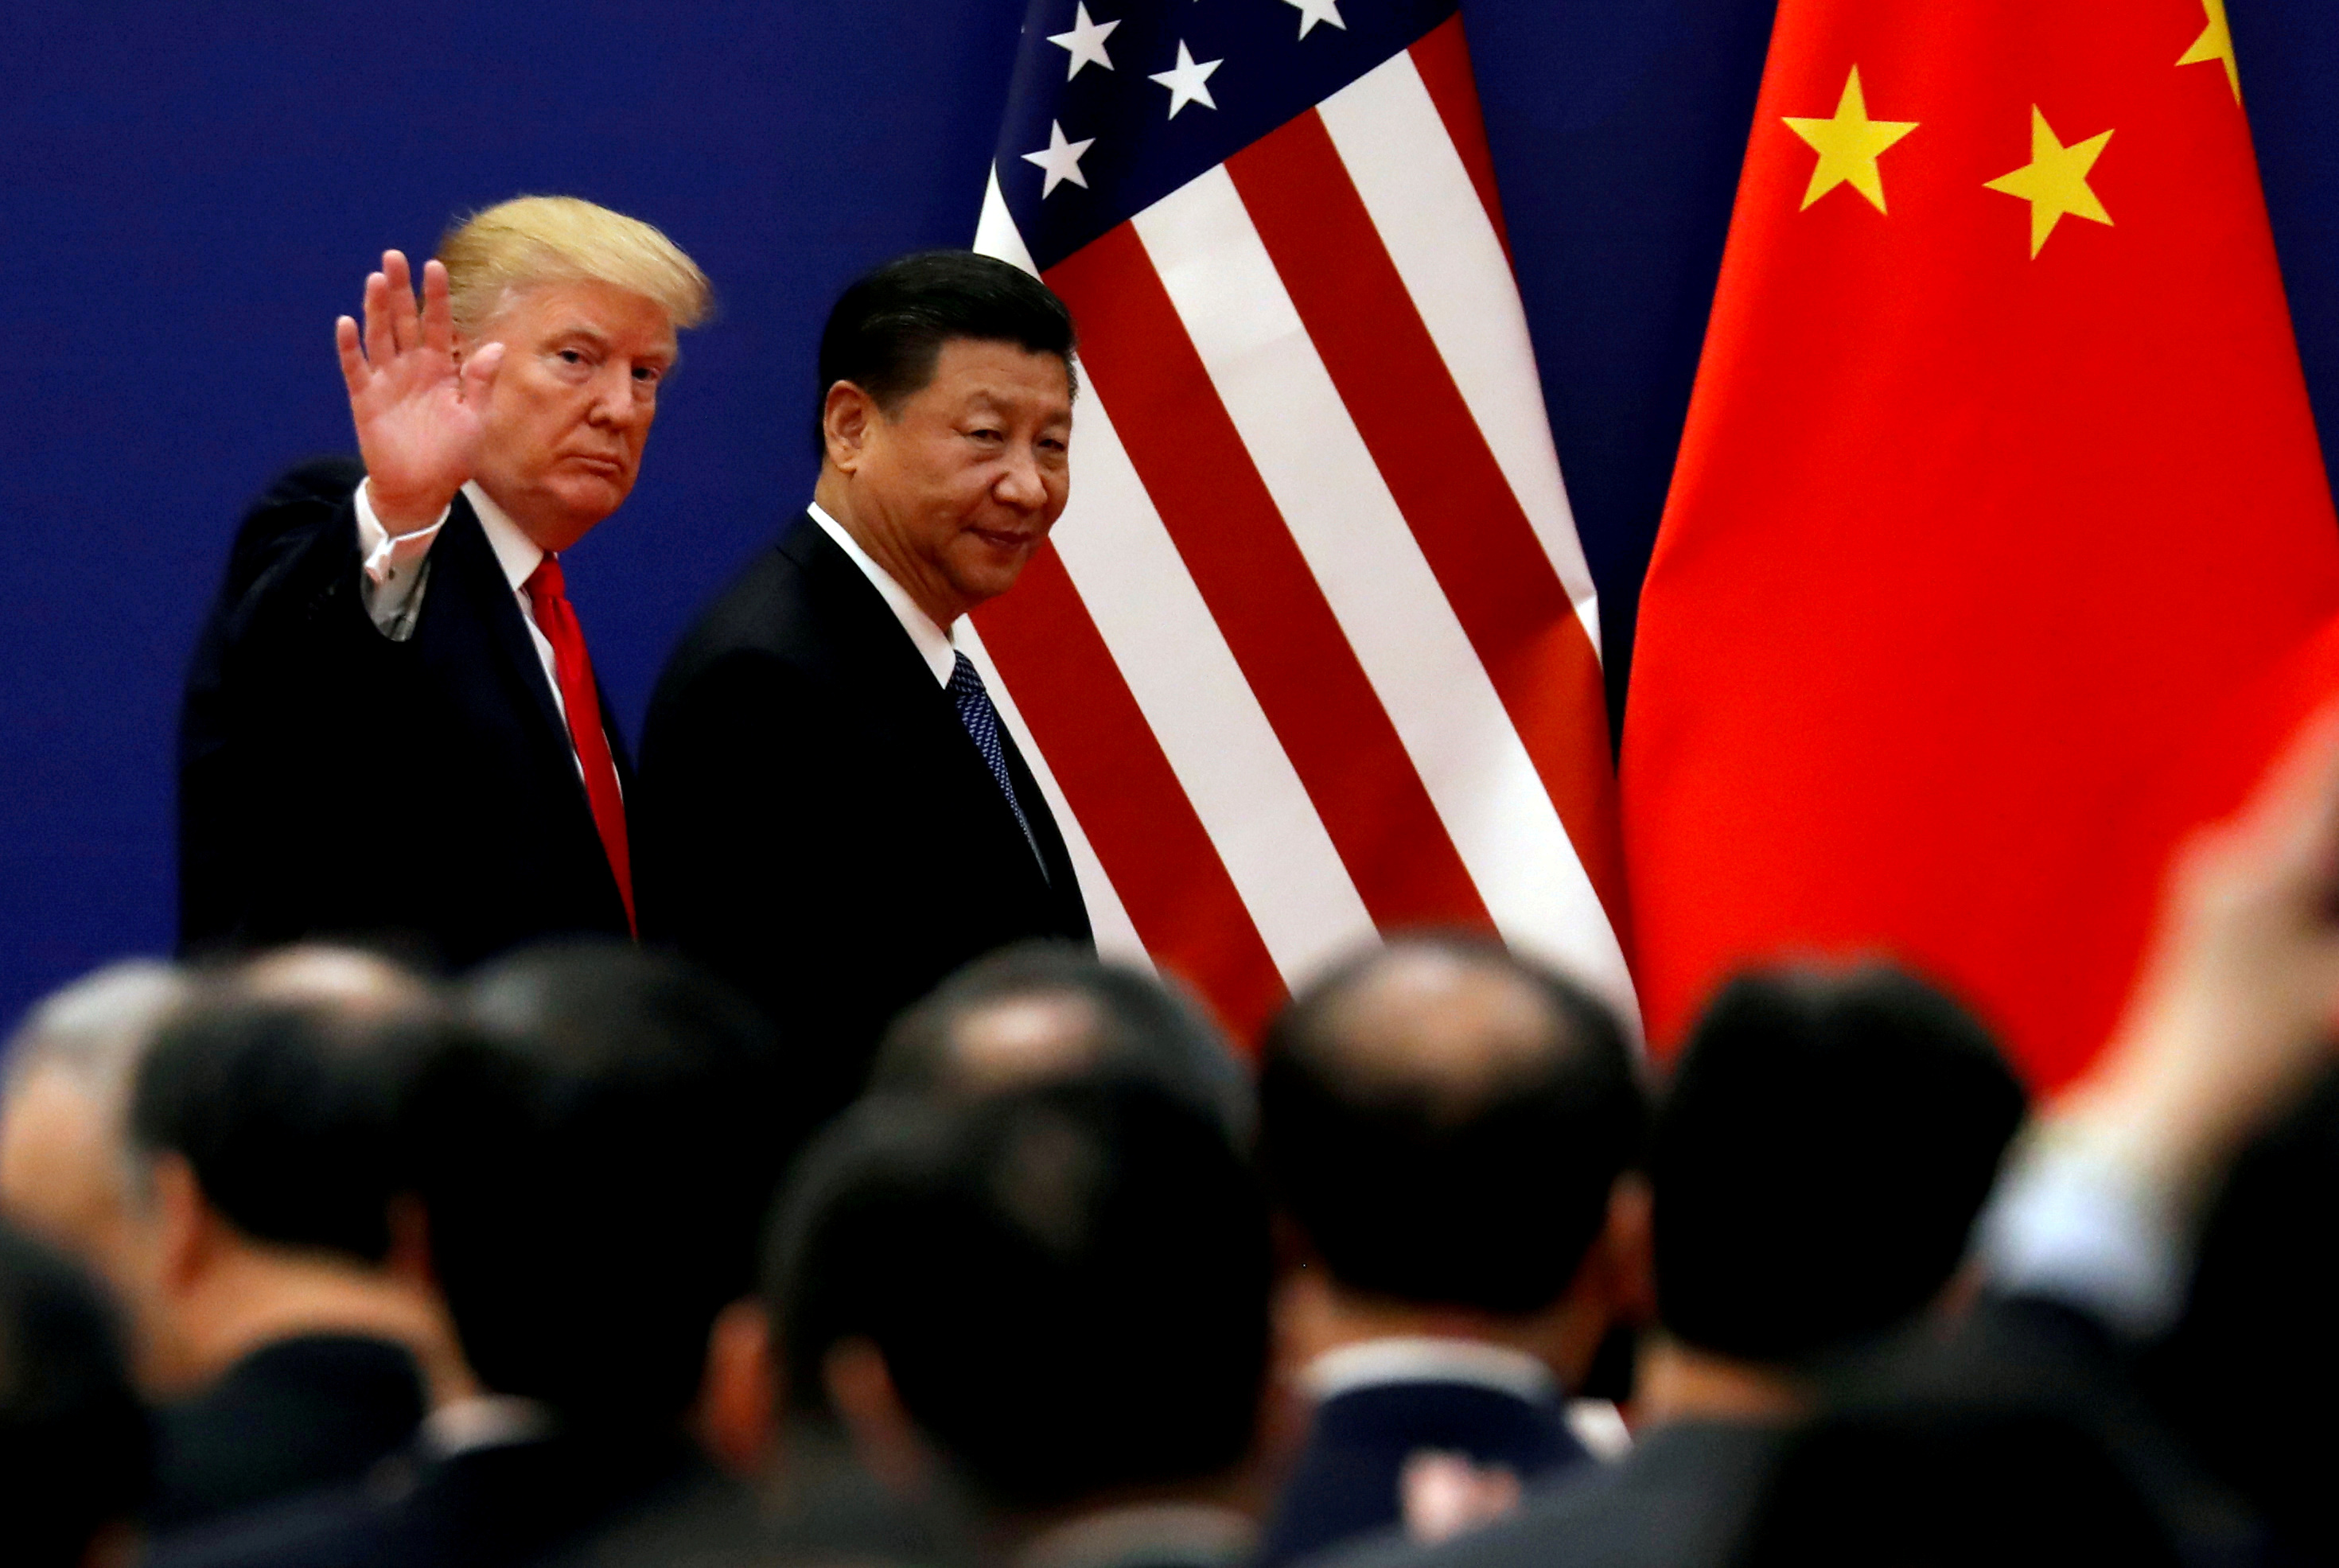 FILE PHOTO: U.S. President Donald Trump and China's President Xi Jinping meet business leaders at the Great Hall of the People in Beijing